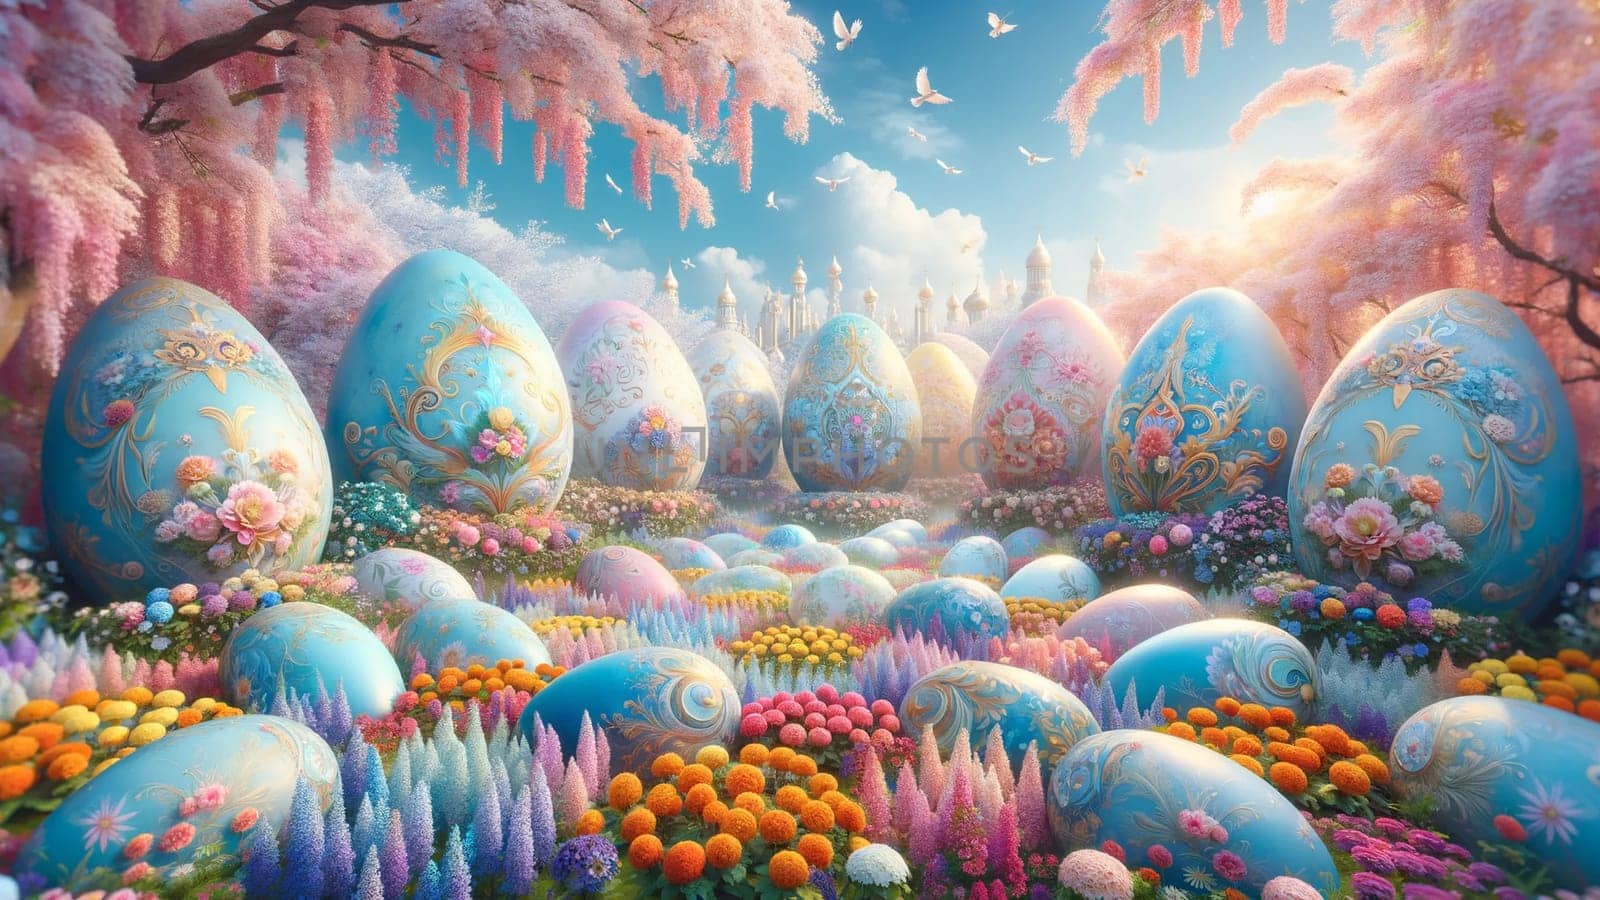 A magical landscape filled with oversized, intricately decorated pastel Easter eggs nestled among a field of vibrant spring flowers under a clear blue sky. by Designlab